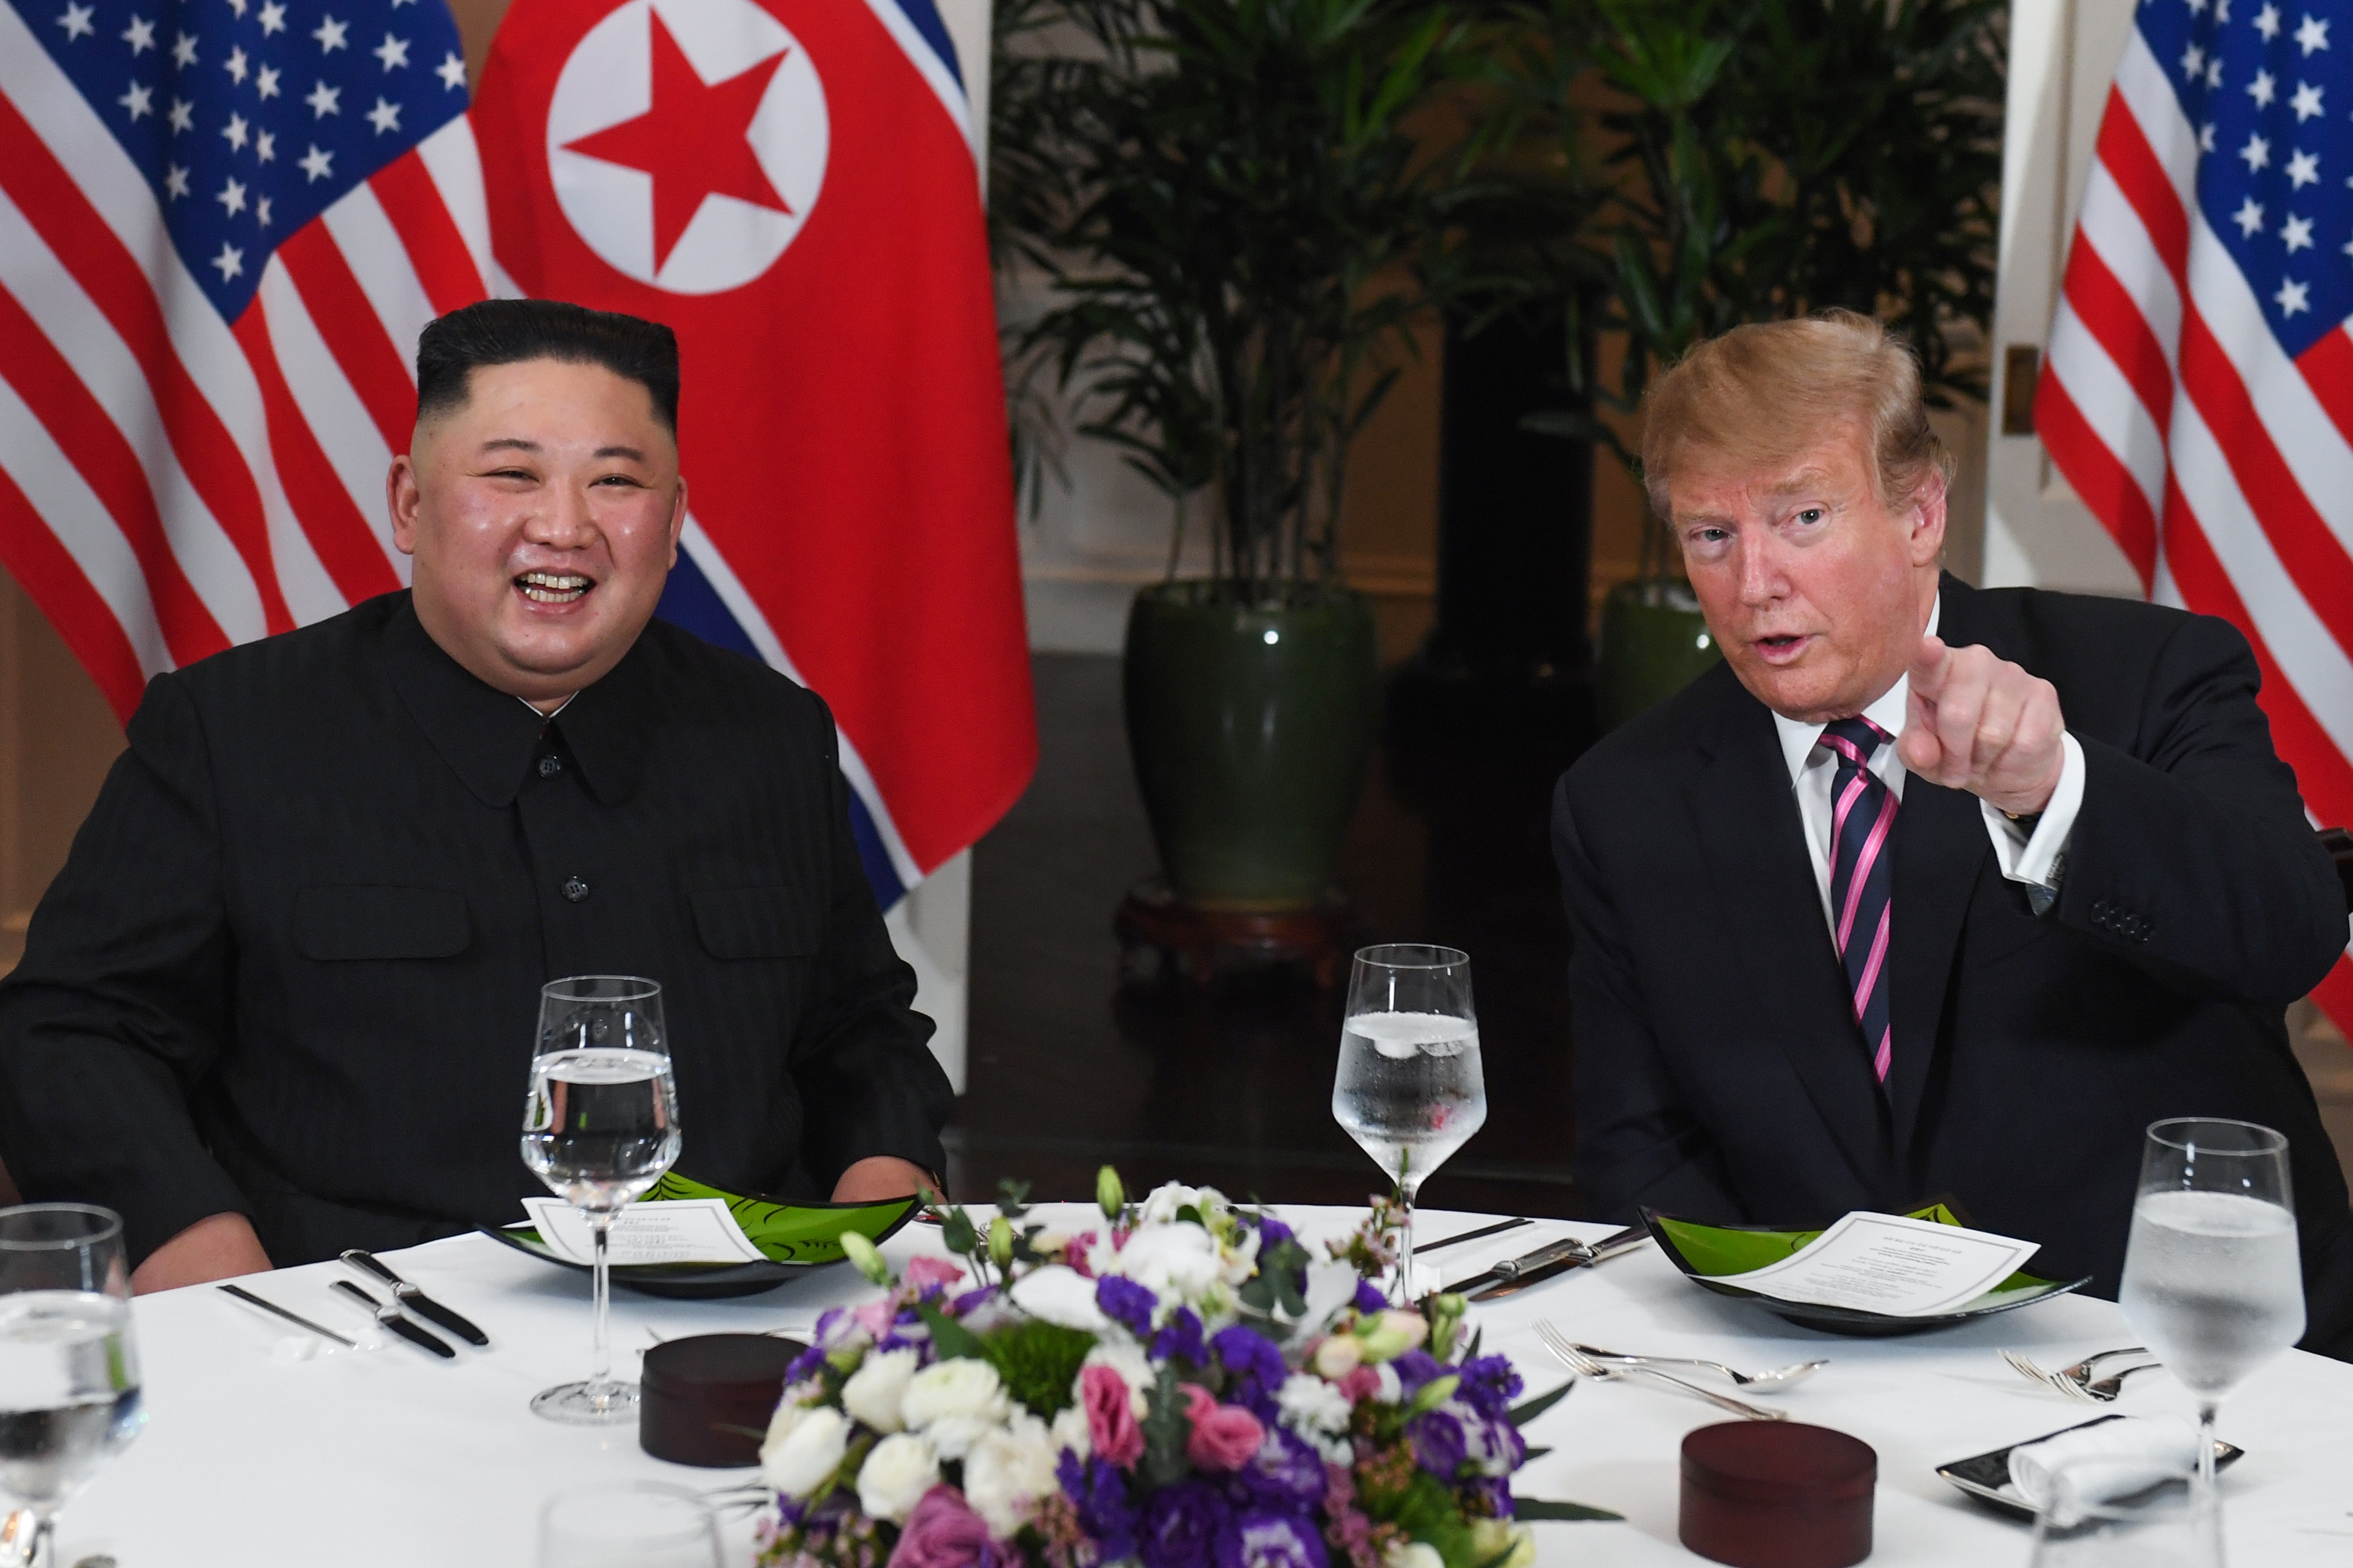 President Donald Trump and North Korea's leader Kim Jong Un sit for a dinner at the Sofitel Legend Metropole hotel in Hanoi, Vietnam on Feb. 27, 2019. (Saul Loeb—AFP/Getty Images)